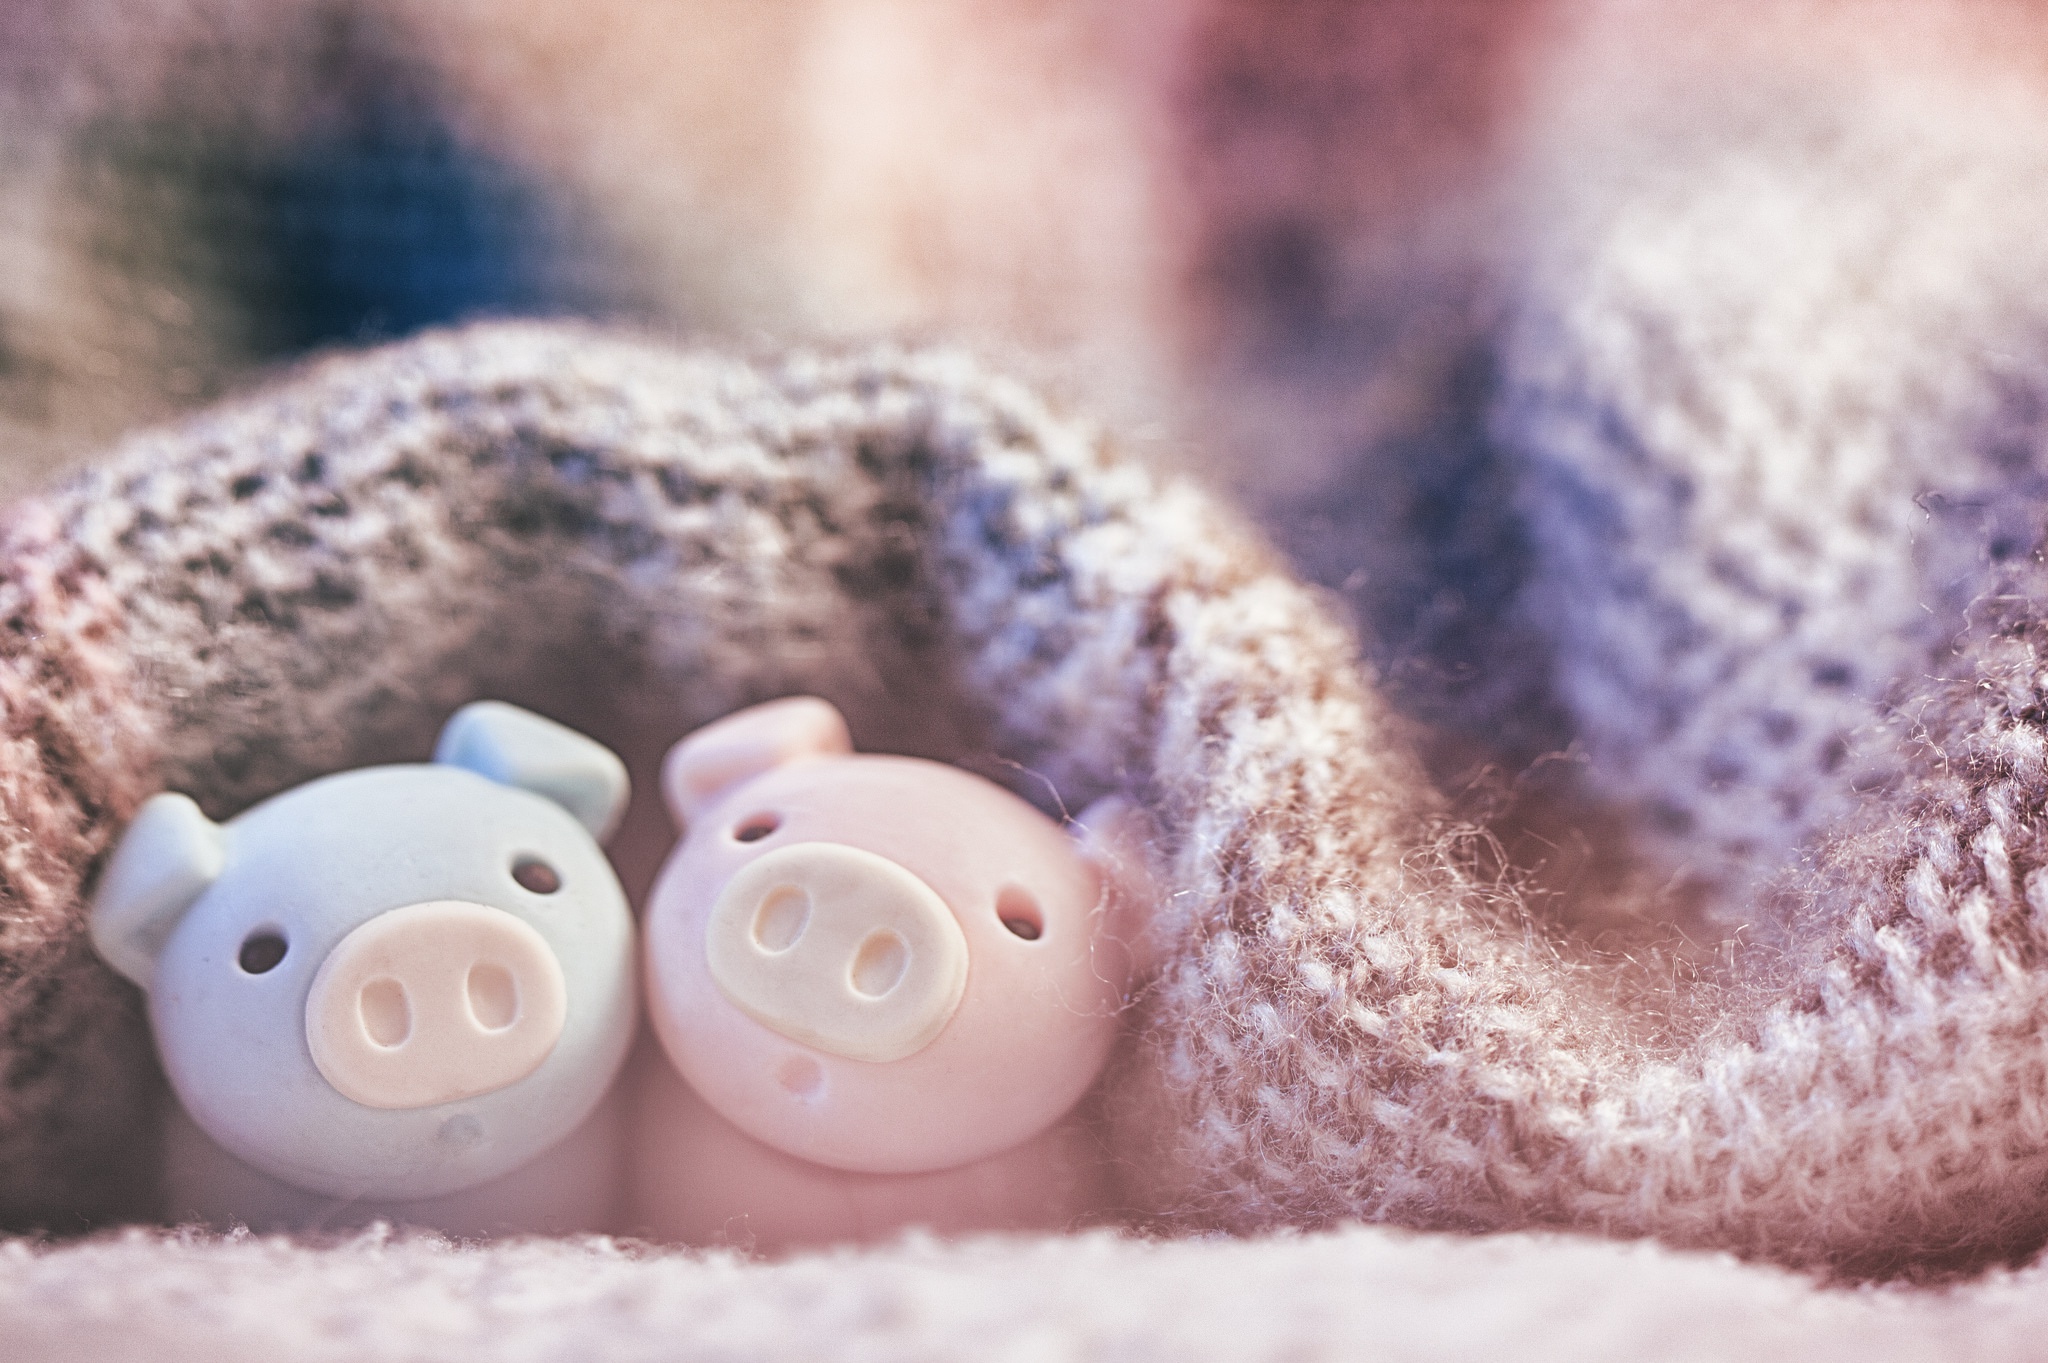 Download wallpaper toys, blanket, cute, pigs, section miscellanea in resolu...